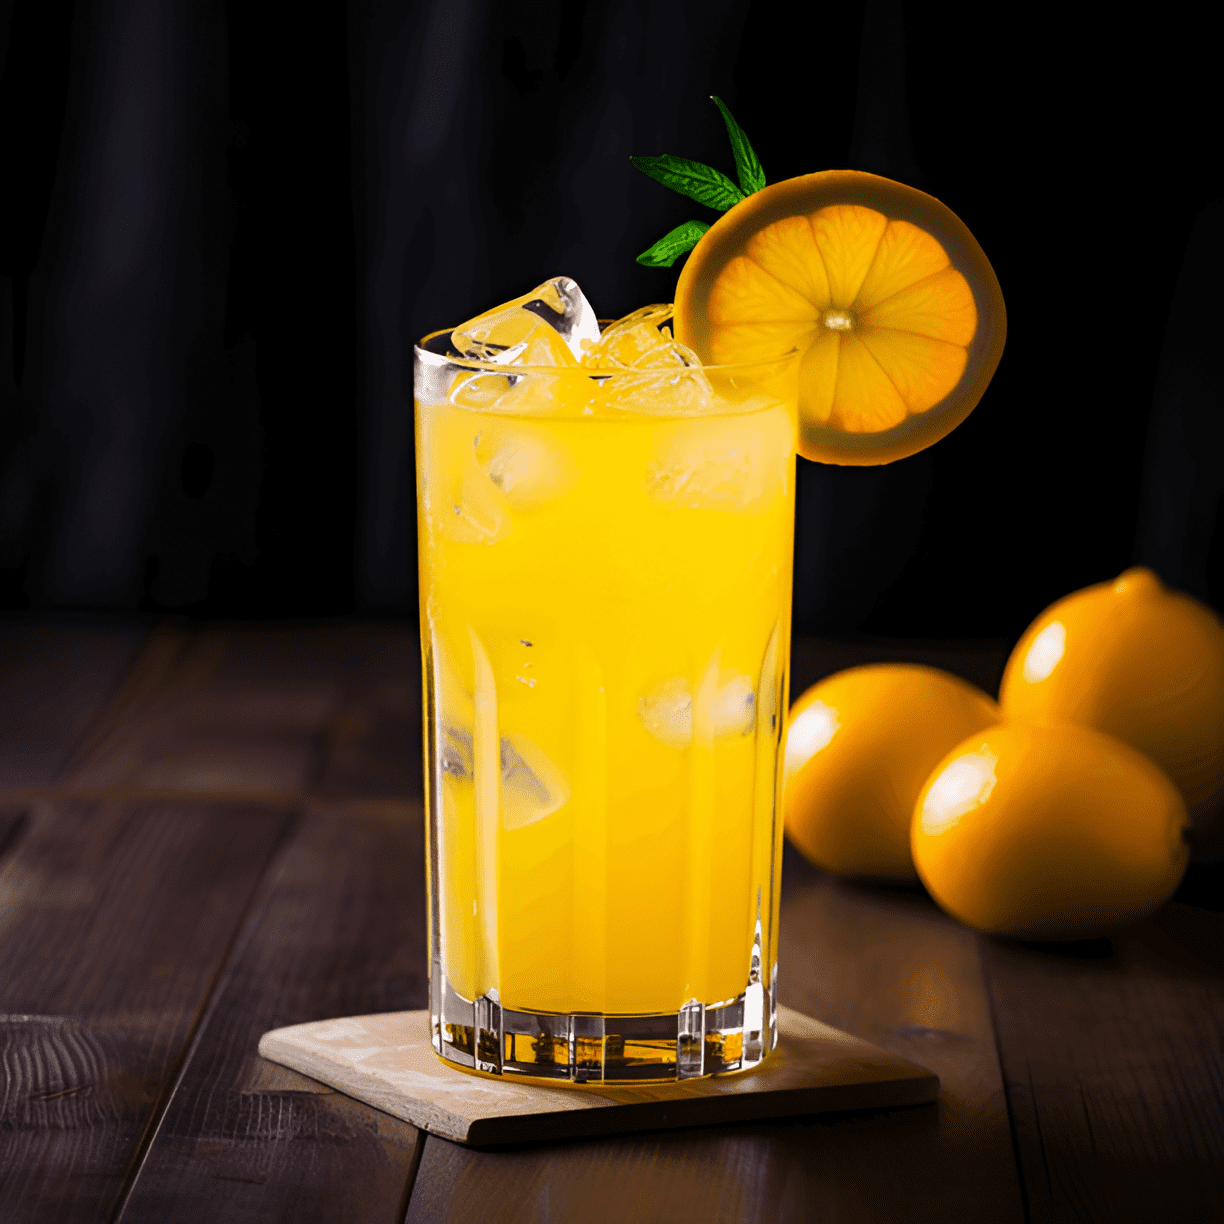 Screwdriver Cocktail Recipe - The Screwdriver cocktail offers a bright, citrusy, and slightly sweet flavor profile. The smoothness of the vodka is complemented by the tangy and refreshing taste of the orange juice, making it a well-balanced and easy-to-drink cocktail.